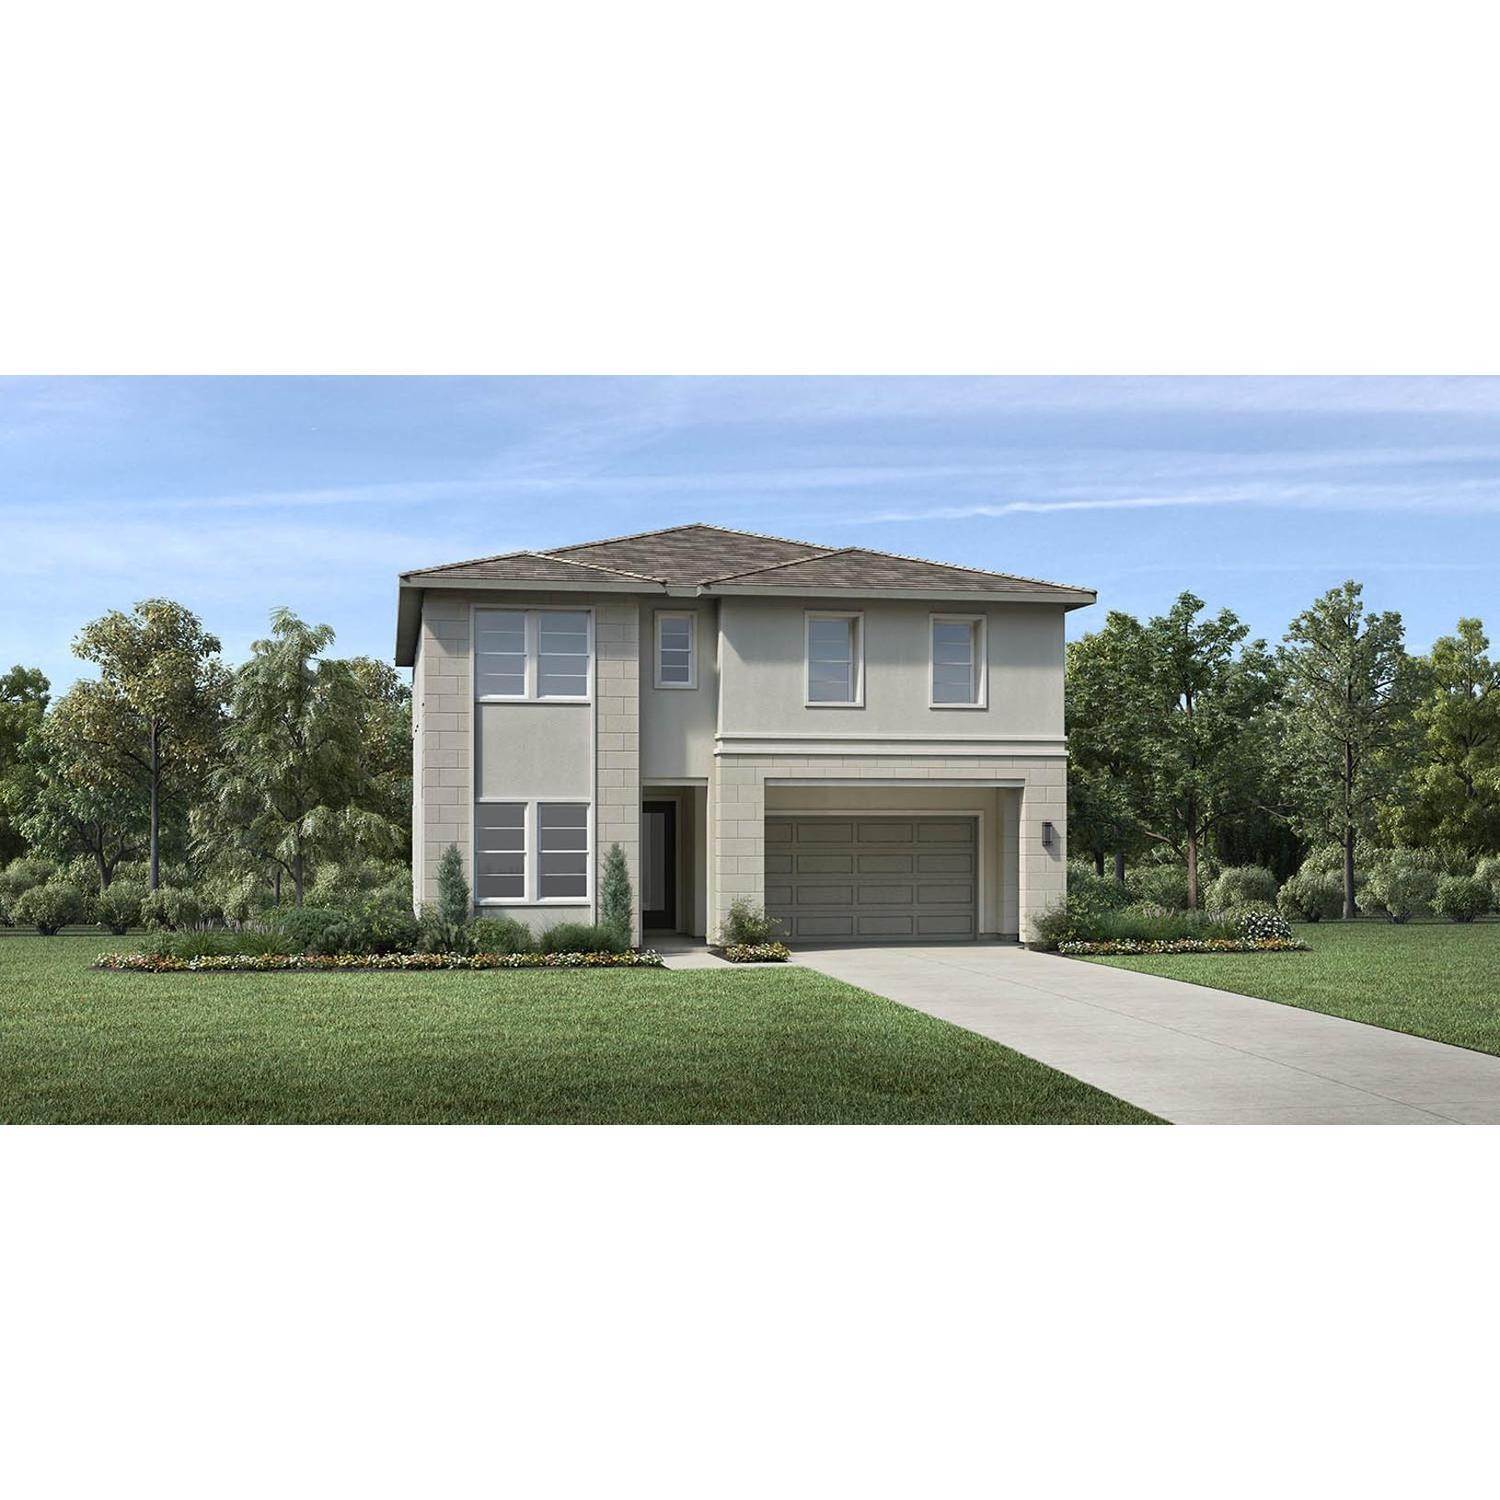 Single Family for Sale at The Magnolias At The Meadows - Viridian 201 Lassen St LAKE FOREST, CALIFORNIA 92630 UNITED STATES